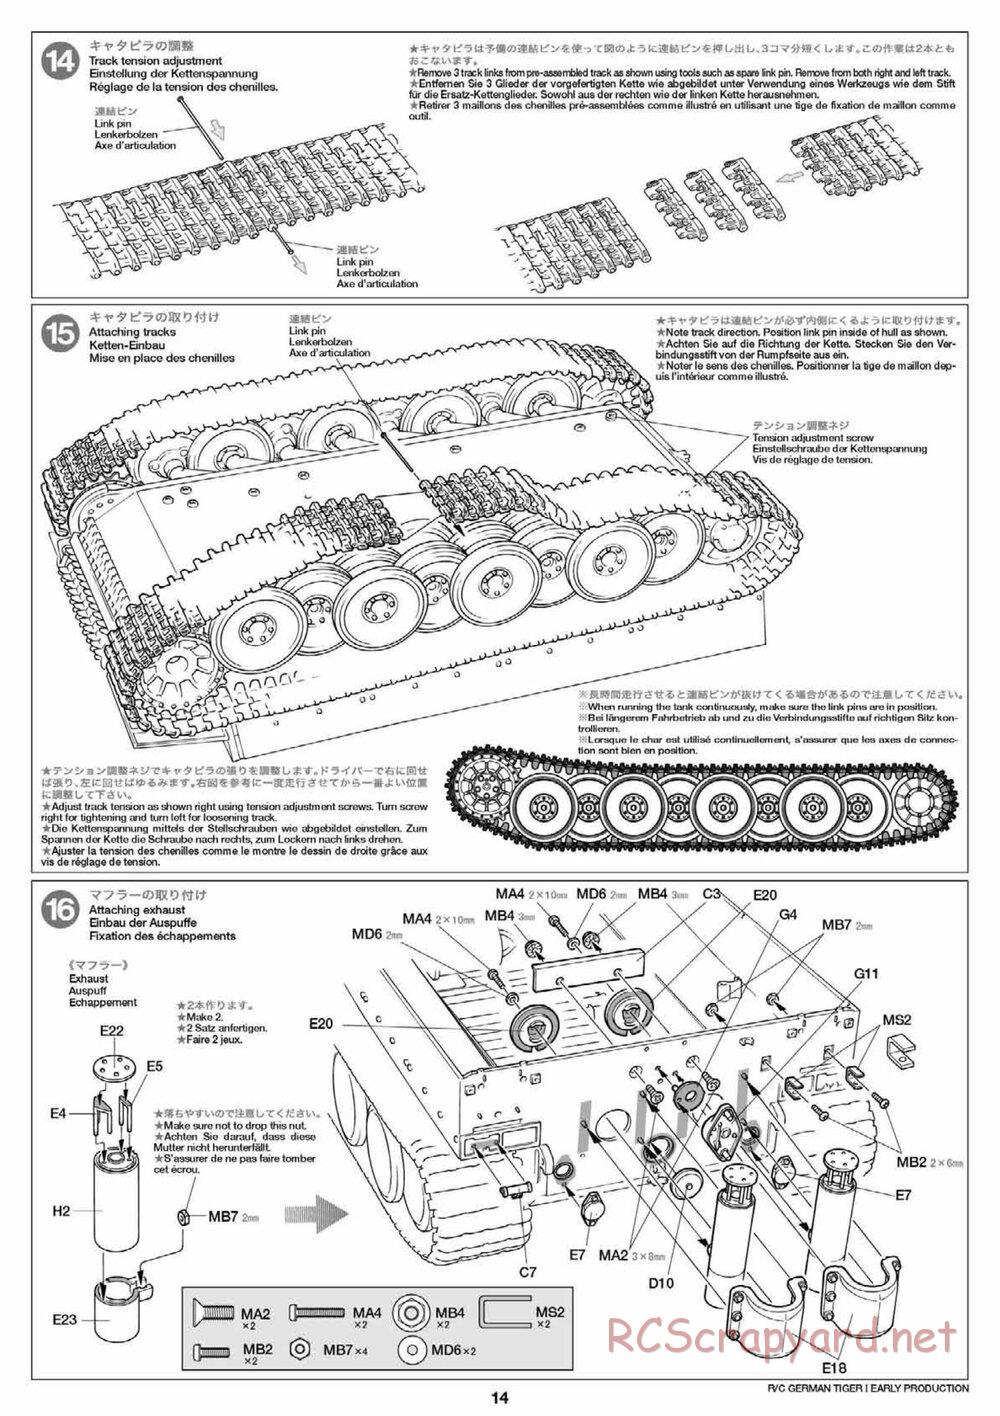 Tamiya - Tiger I Early Production - 1/16 Scale Chassis - Manual - Page 14